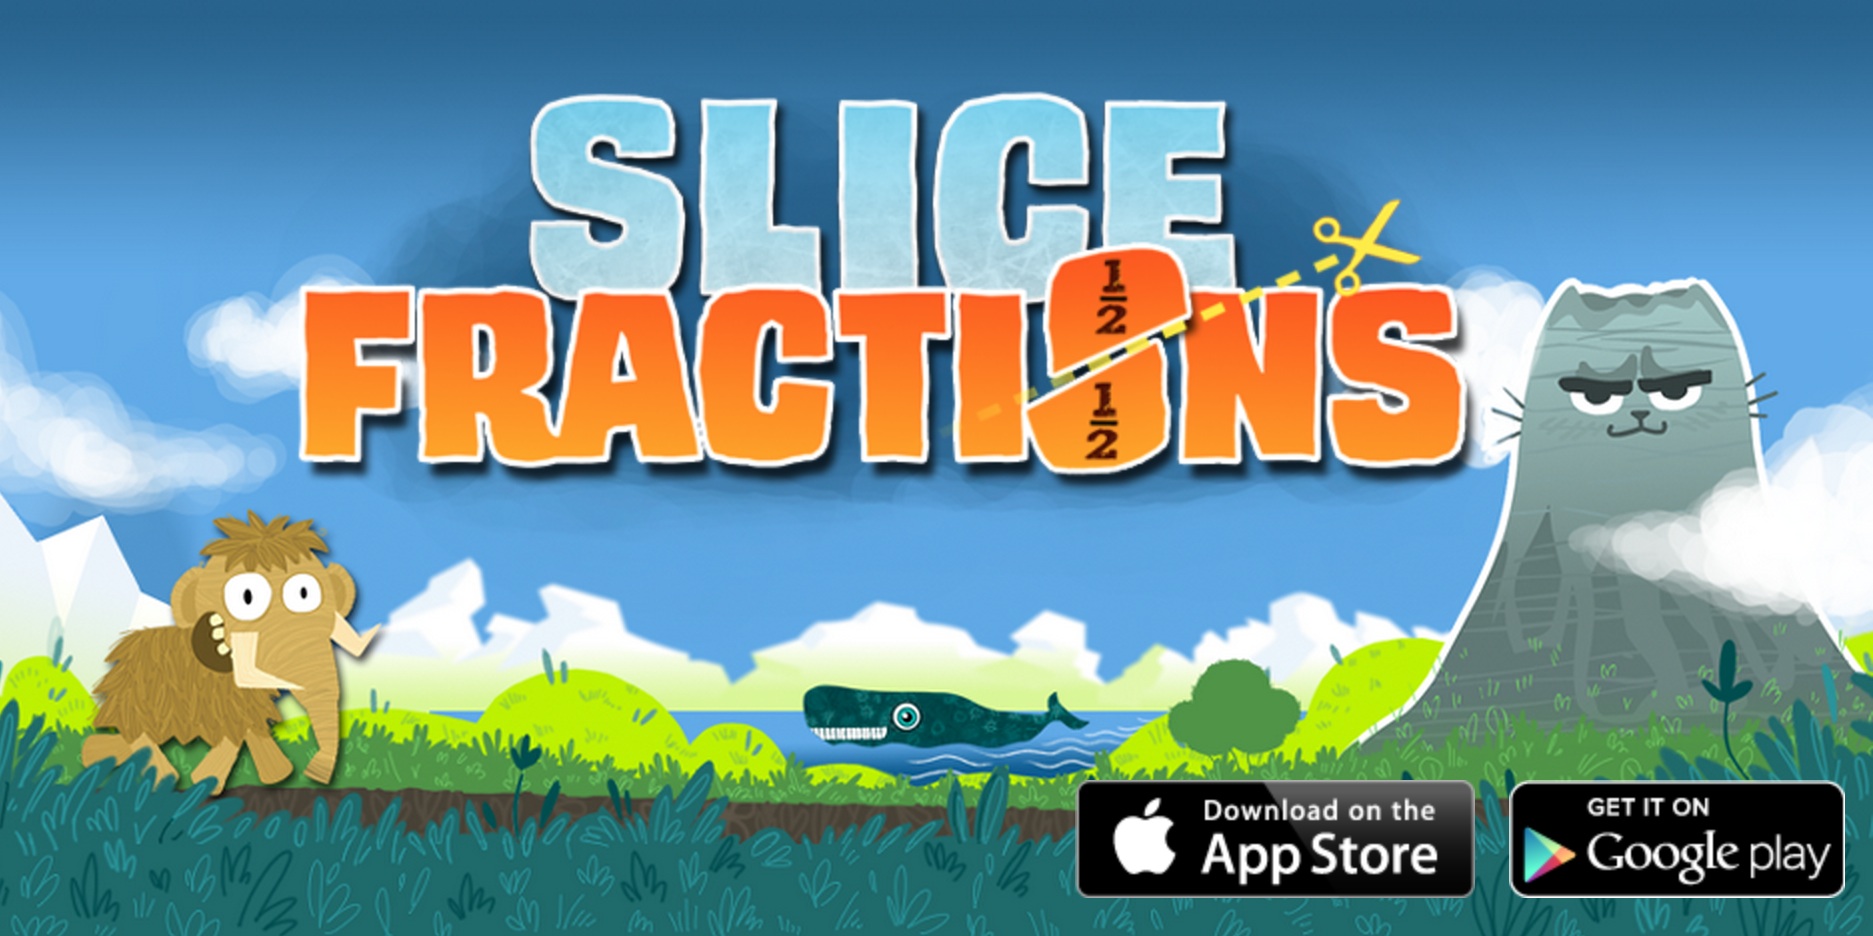 Review: Slice Fractions